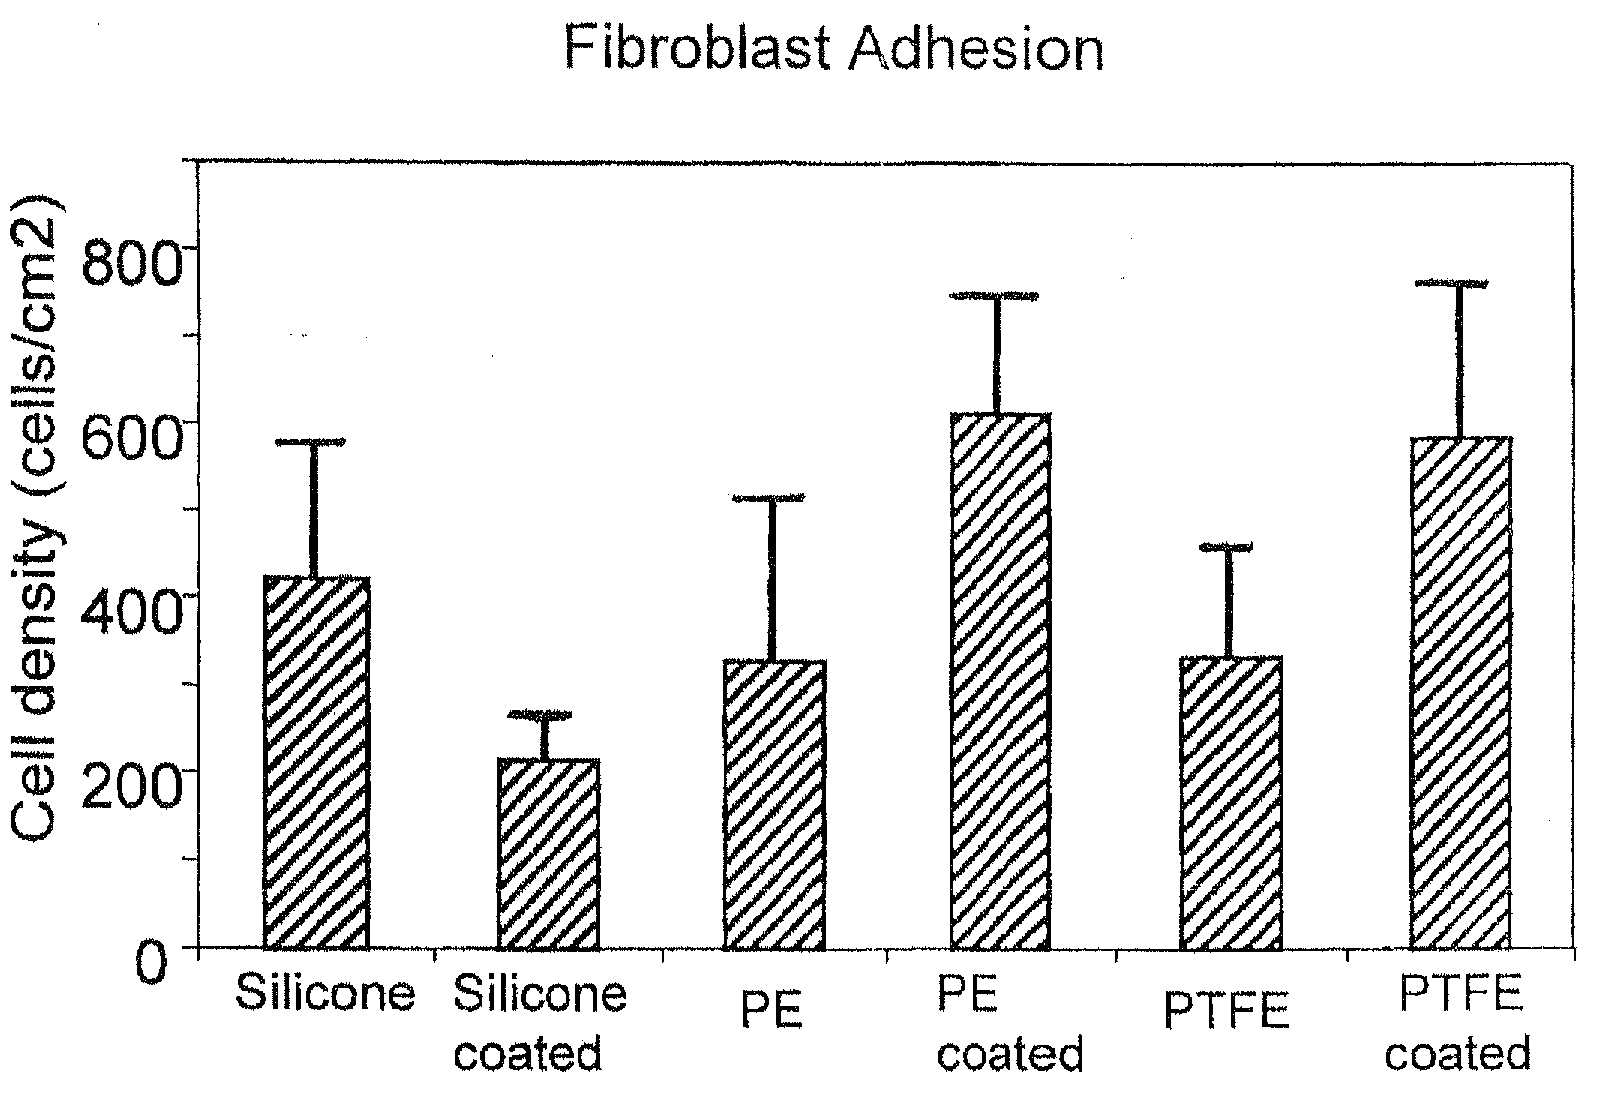 Inhibitory cell adhesion surfaces